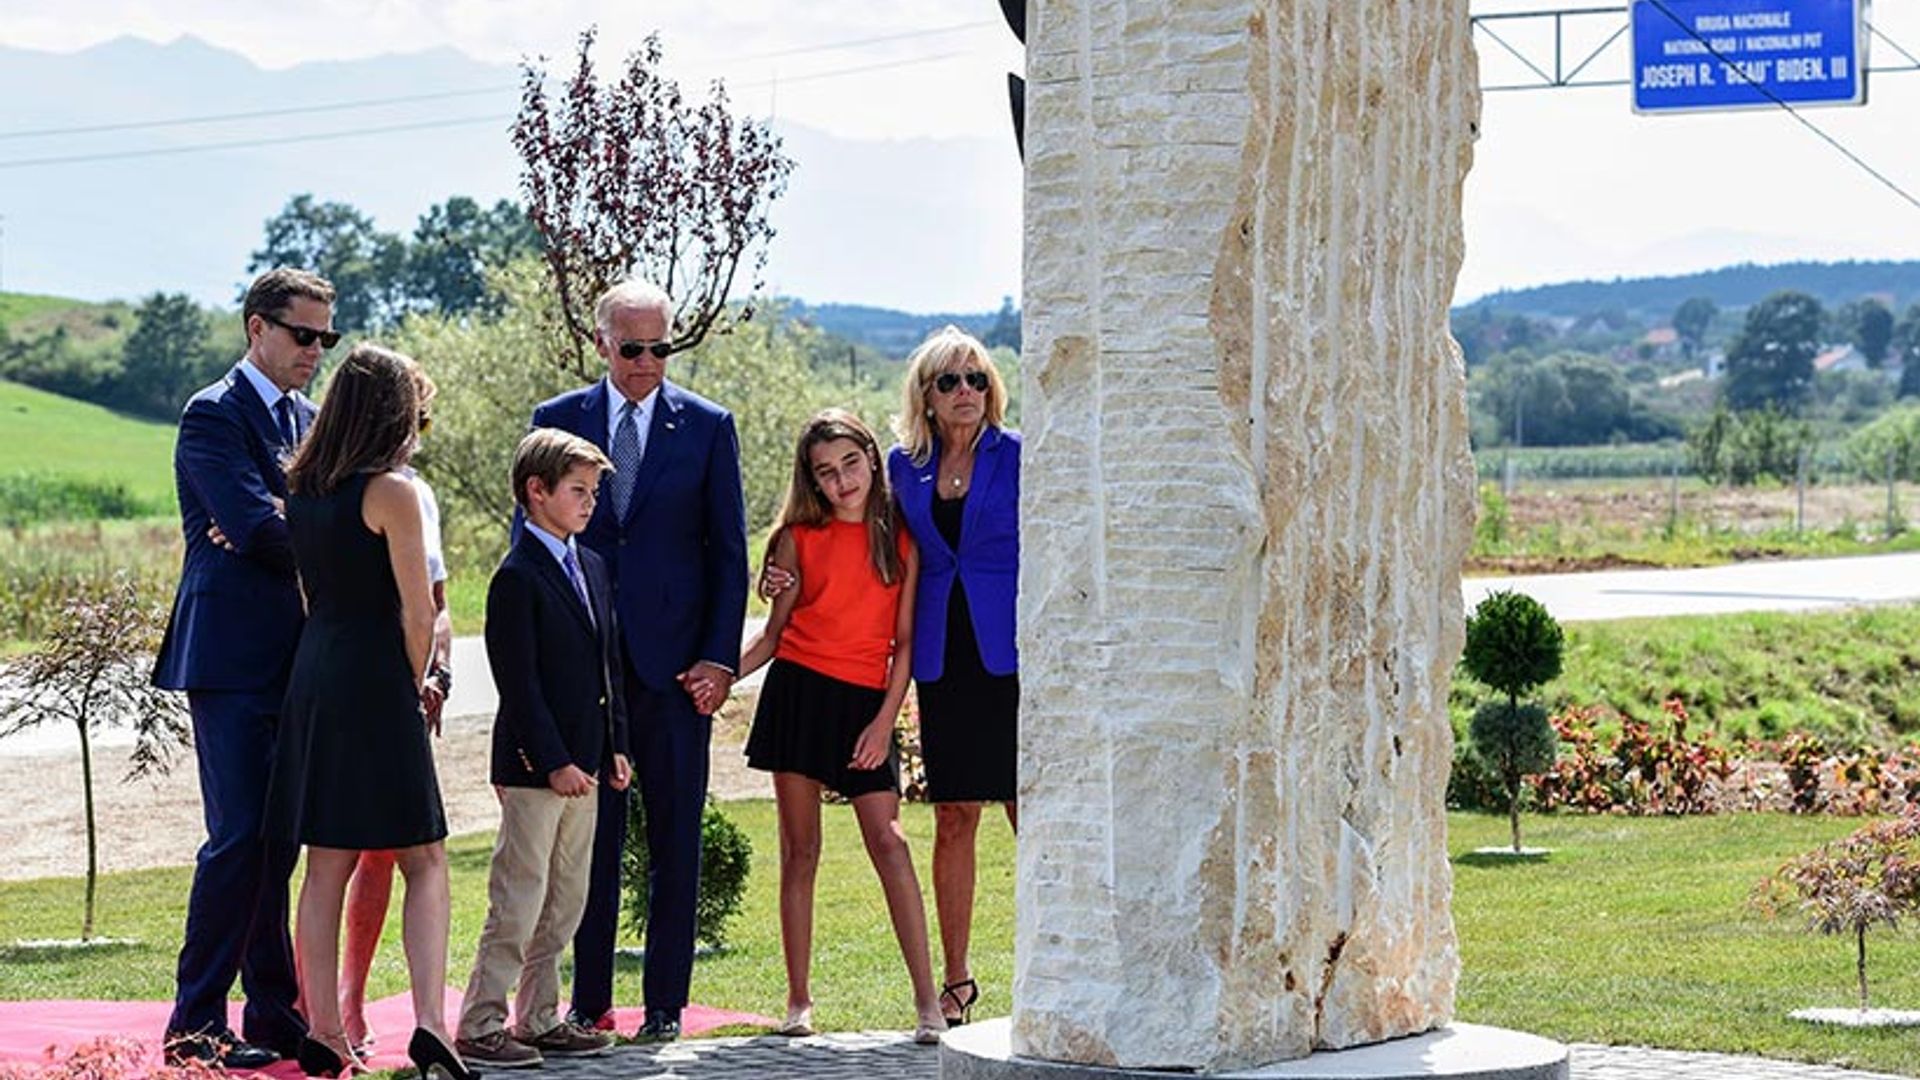 Joe Biden pays emotional tribute to late son at touching ceremony